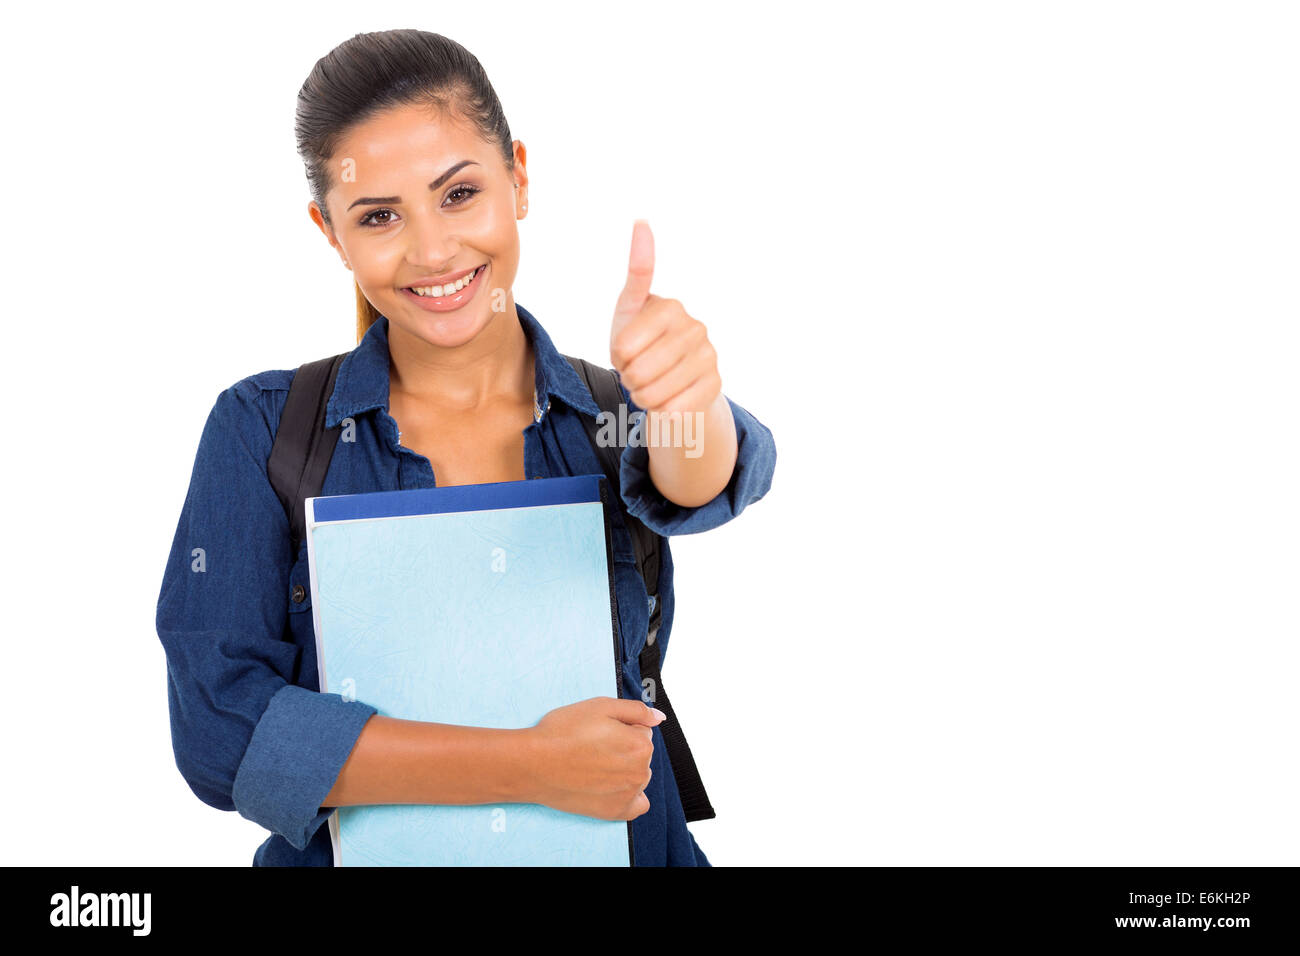 pretty female college student with happy smile giving thumbs up Stock Photo